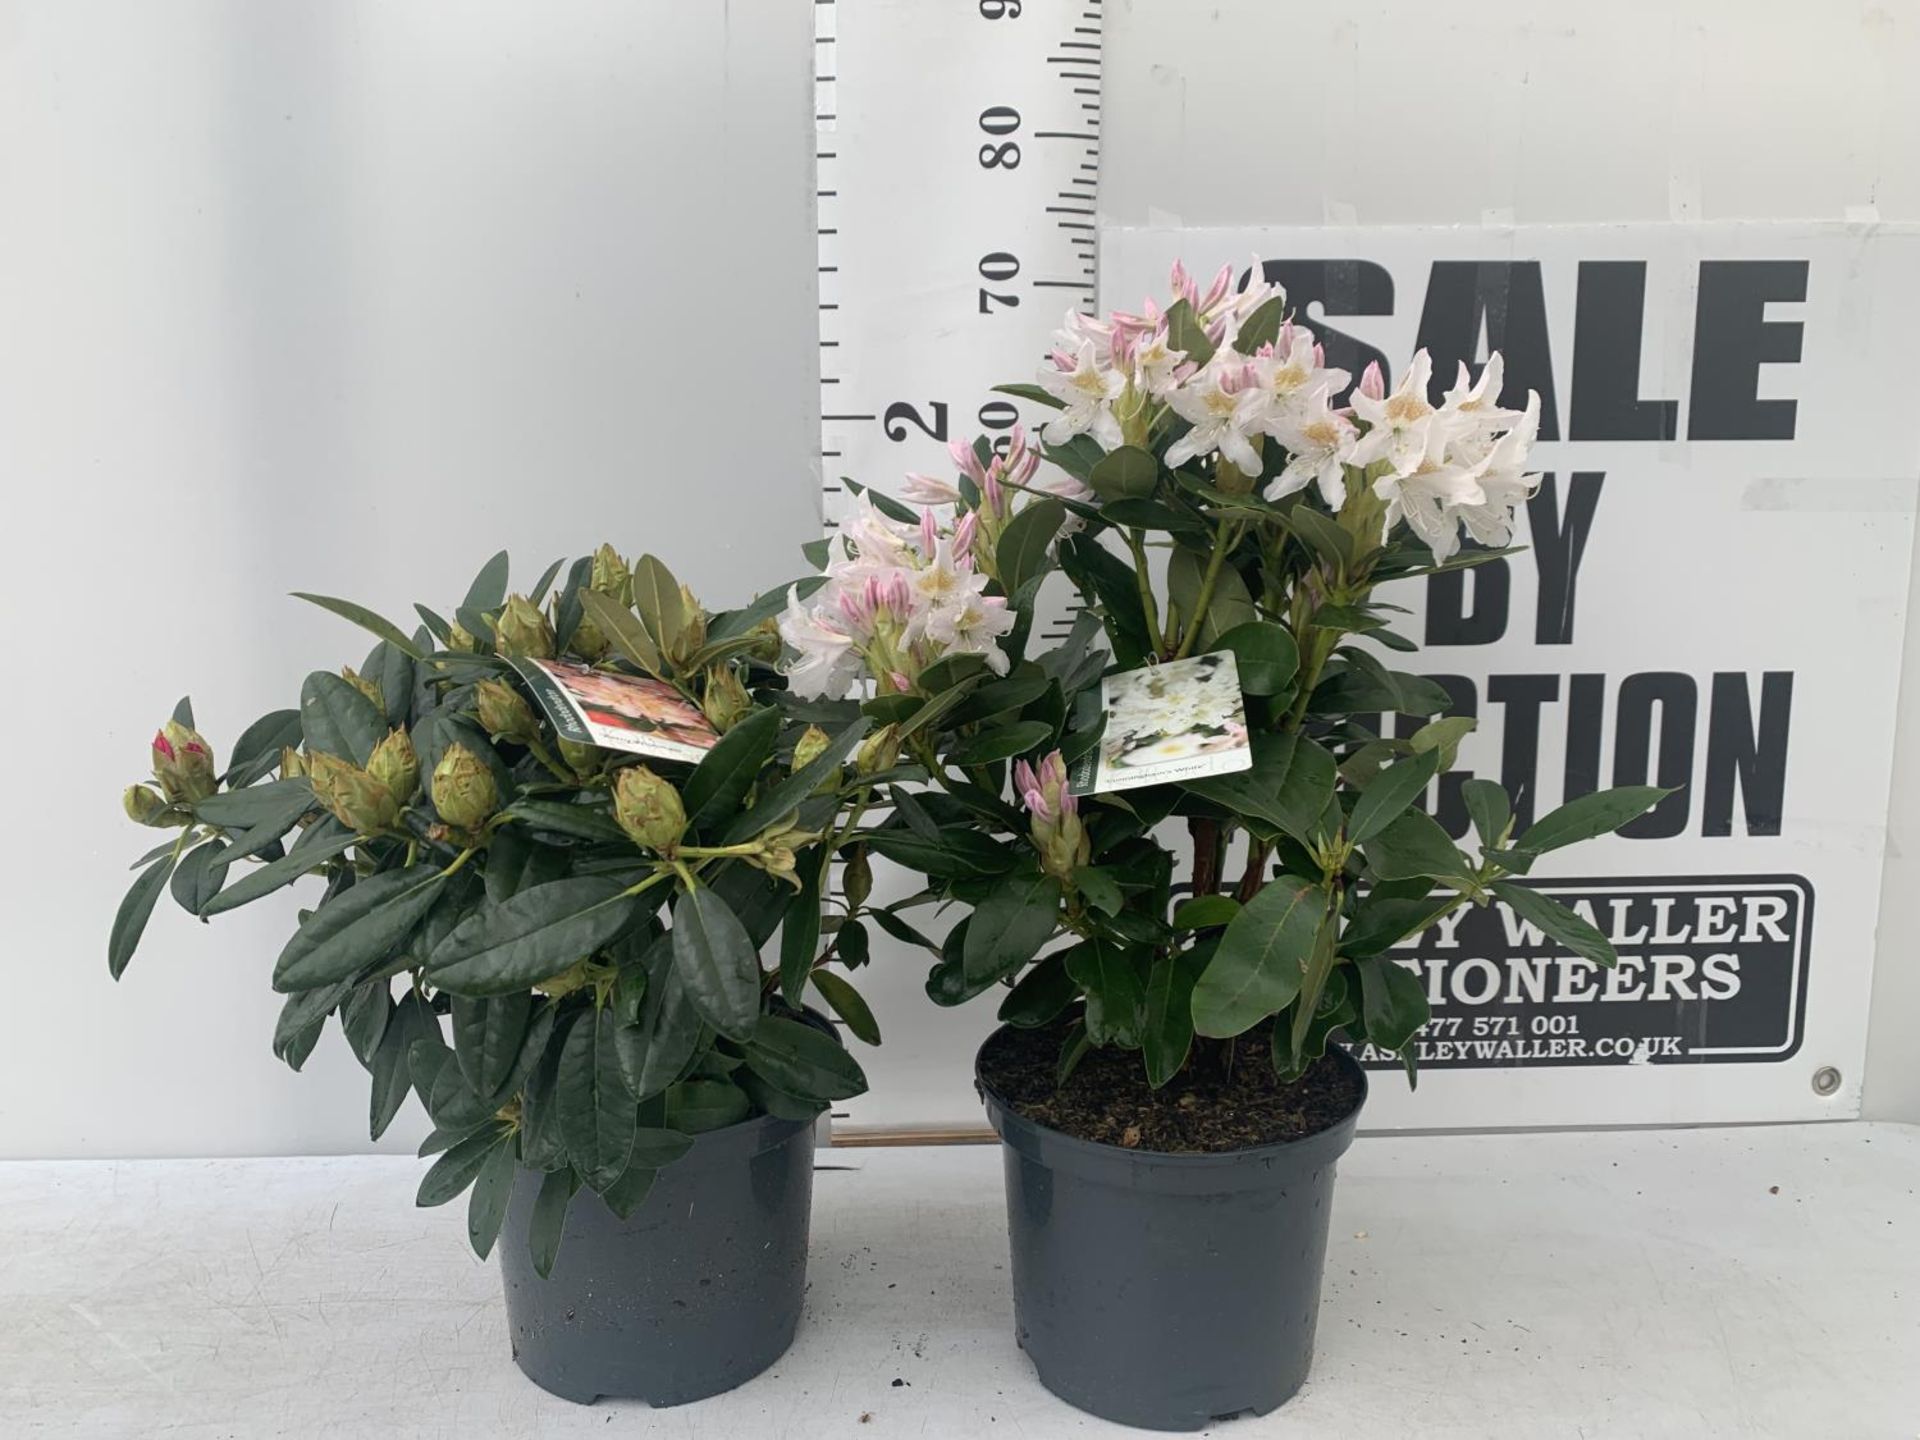 TWO RHODODENDRON CUNNINGHAM'S WHITE AND PERCY WISEMAN PINK IN 5 LTR POTS 60CM TALL PLUS VAT TO BE